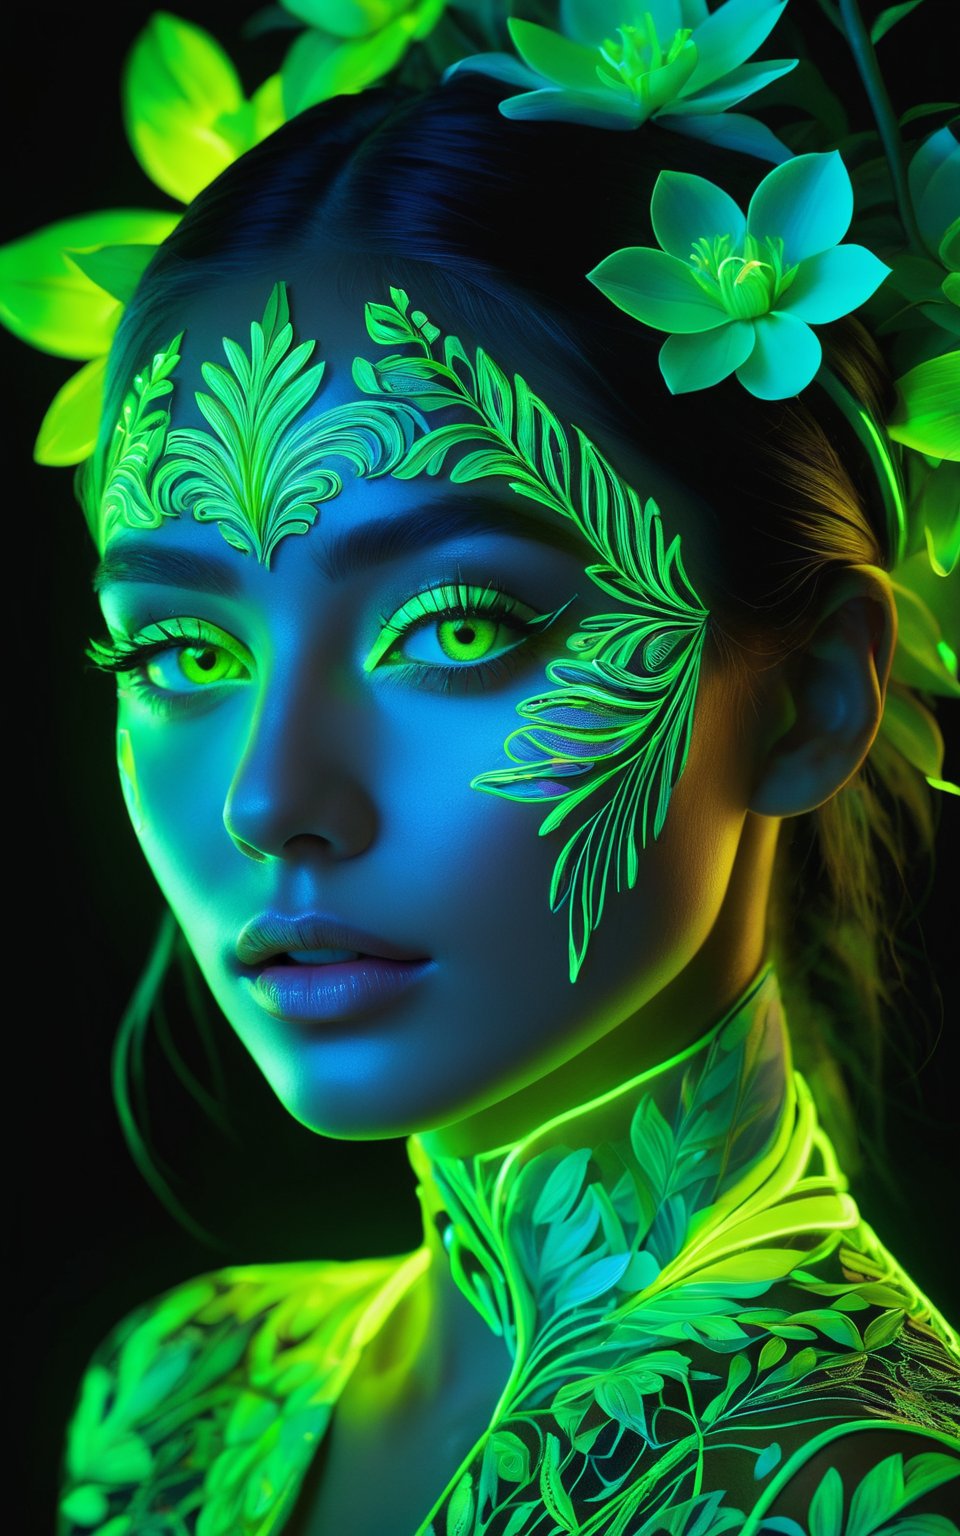 A vibrant and hyper-detailed portrait of a woman's face illuminated with neon light. Her face is adorned with intricate, glowing floral patterns and botanical elements. Her eyes are glowing neon green, and her lips are highlighted with neon light. The background is dark, enhancing the glow of the neon details. The overall style is a fusion of neon art and botanical motifs, creating a mesmerizing and surreal composition. (hyper-detailed, neon light, glowing floral patterns, botanical elements, neon green eyes, neon-highlighted lips, dark background, fusion of neon art and botanical motifs, mesmerizing, surreal)